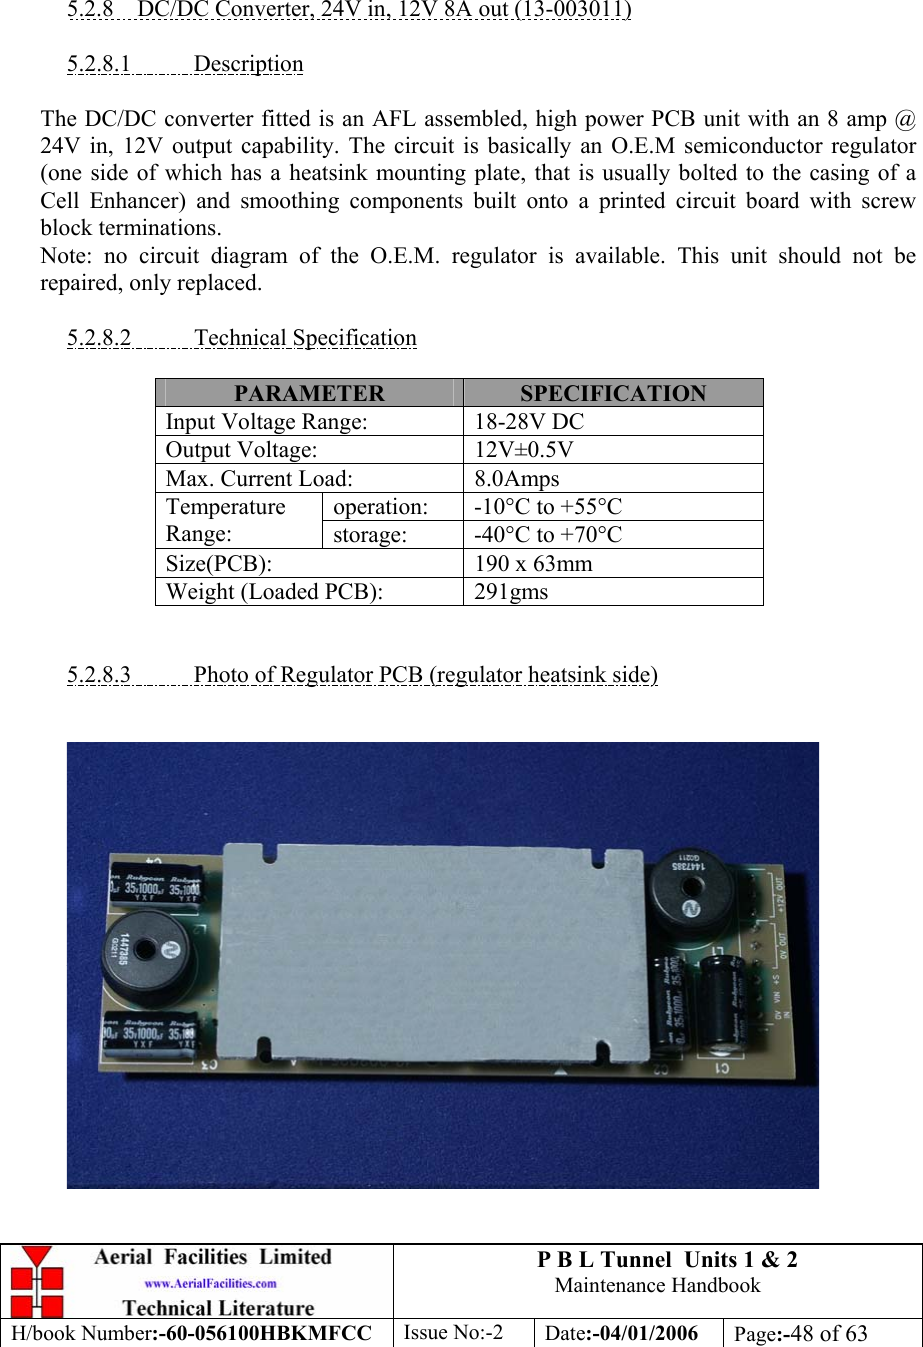 P B L Tunnel  Units 1 &amp; 2 Maintenance Handbook H/book Number:-60-056100HBKMFCC  Issue No:-2  Date:-04/01/2006  Page:-48 of 63     5.2.8  DC/DC Converter, 24V in, 12V 8A out (13-003011)  5.2.8.1 Description  The DC/DC converter fitted is an AFL assembled, high power PCB unit with an 8 amp @ 24V in, 12V output capability. The circuit is basically an O.E.M semiconductor regulator (one side of which has a heatsink mounting plate, that is usually bolted to the casing of a Cell Enhancer) and smoothing components built onto a printed circuit board with screw block terminations. Note: no circuit diagram of the O.E.M. regulator is available. This unit should not be repaired, only replaced.  5.2.8.2 Technical Specification  PARAMETER  SPECIFICATION Input Voltage Range:  18-28V DC Output Voltage:  12V±0.5V Max. Current Load:  8.0Amps operation: -10°C to +55°C Temperature Range:  storage: -40°C to +70°C Size(PCB):  190 x 63mm Weight (Loaded PCB):  291gms   5.2.8.3  Photo of Regulator PCB (regulator heatsink side)       